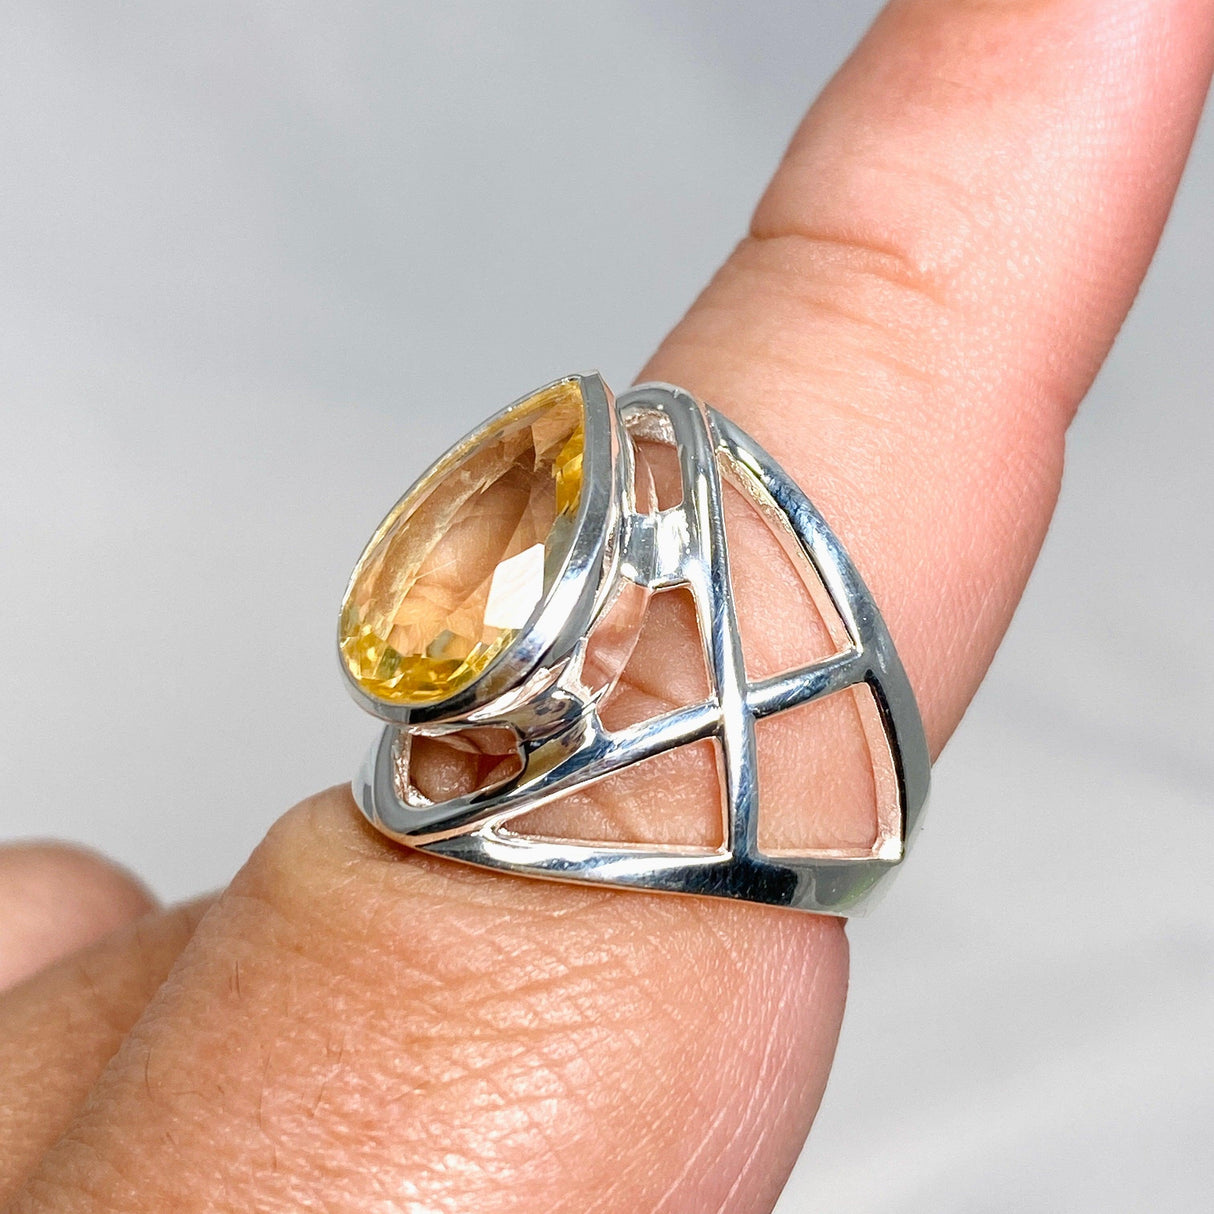 Citrine Faceted Teardrop Ring in a Decorative Setting R3686 - Nature's Magick